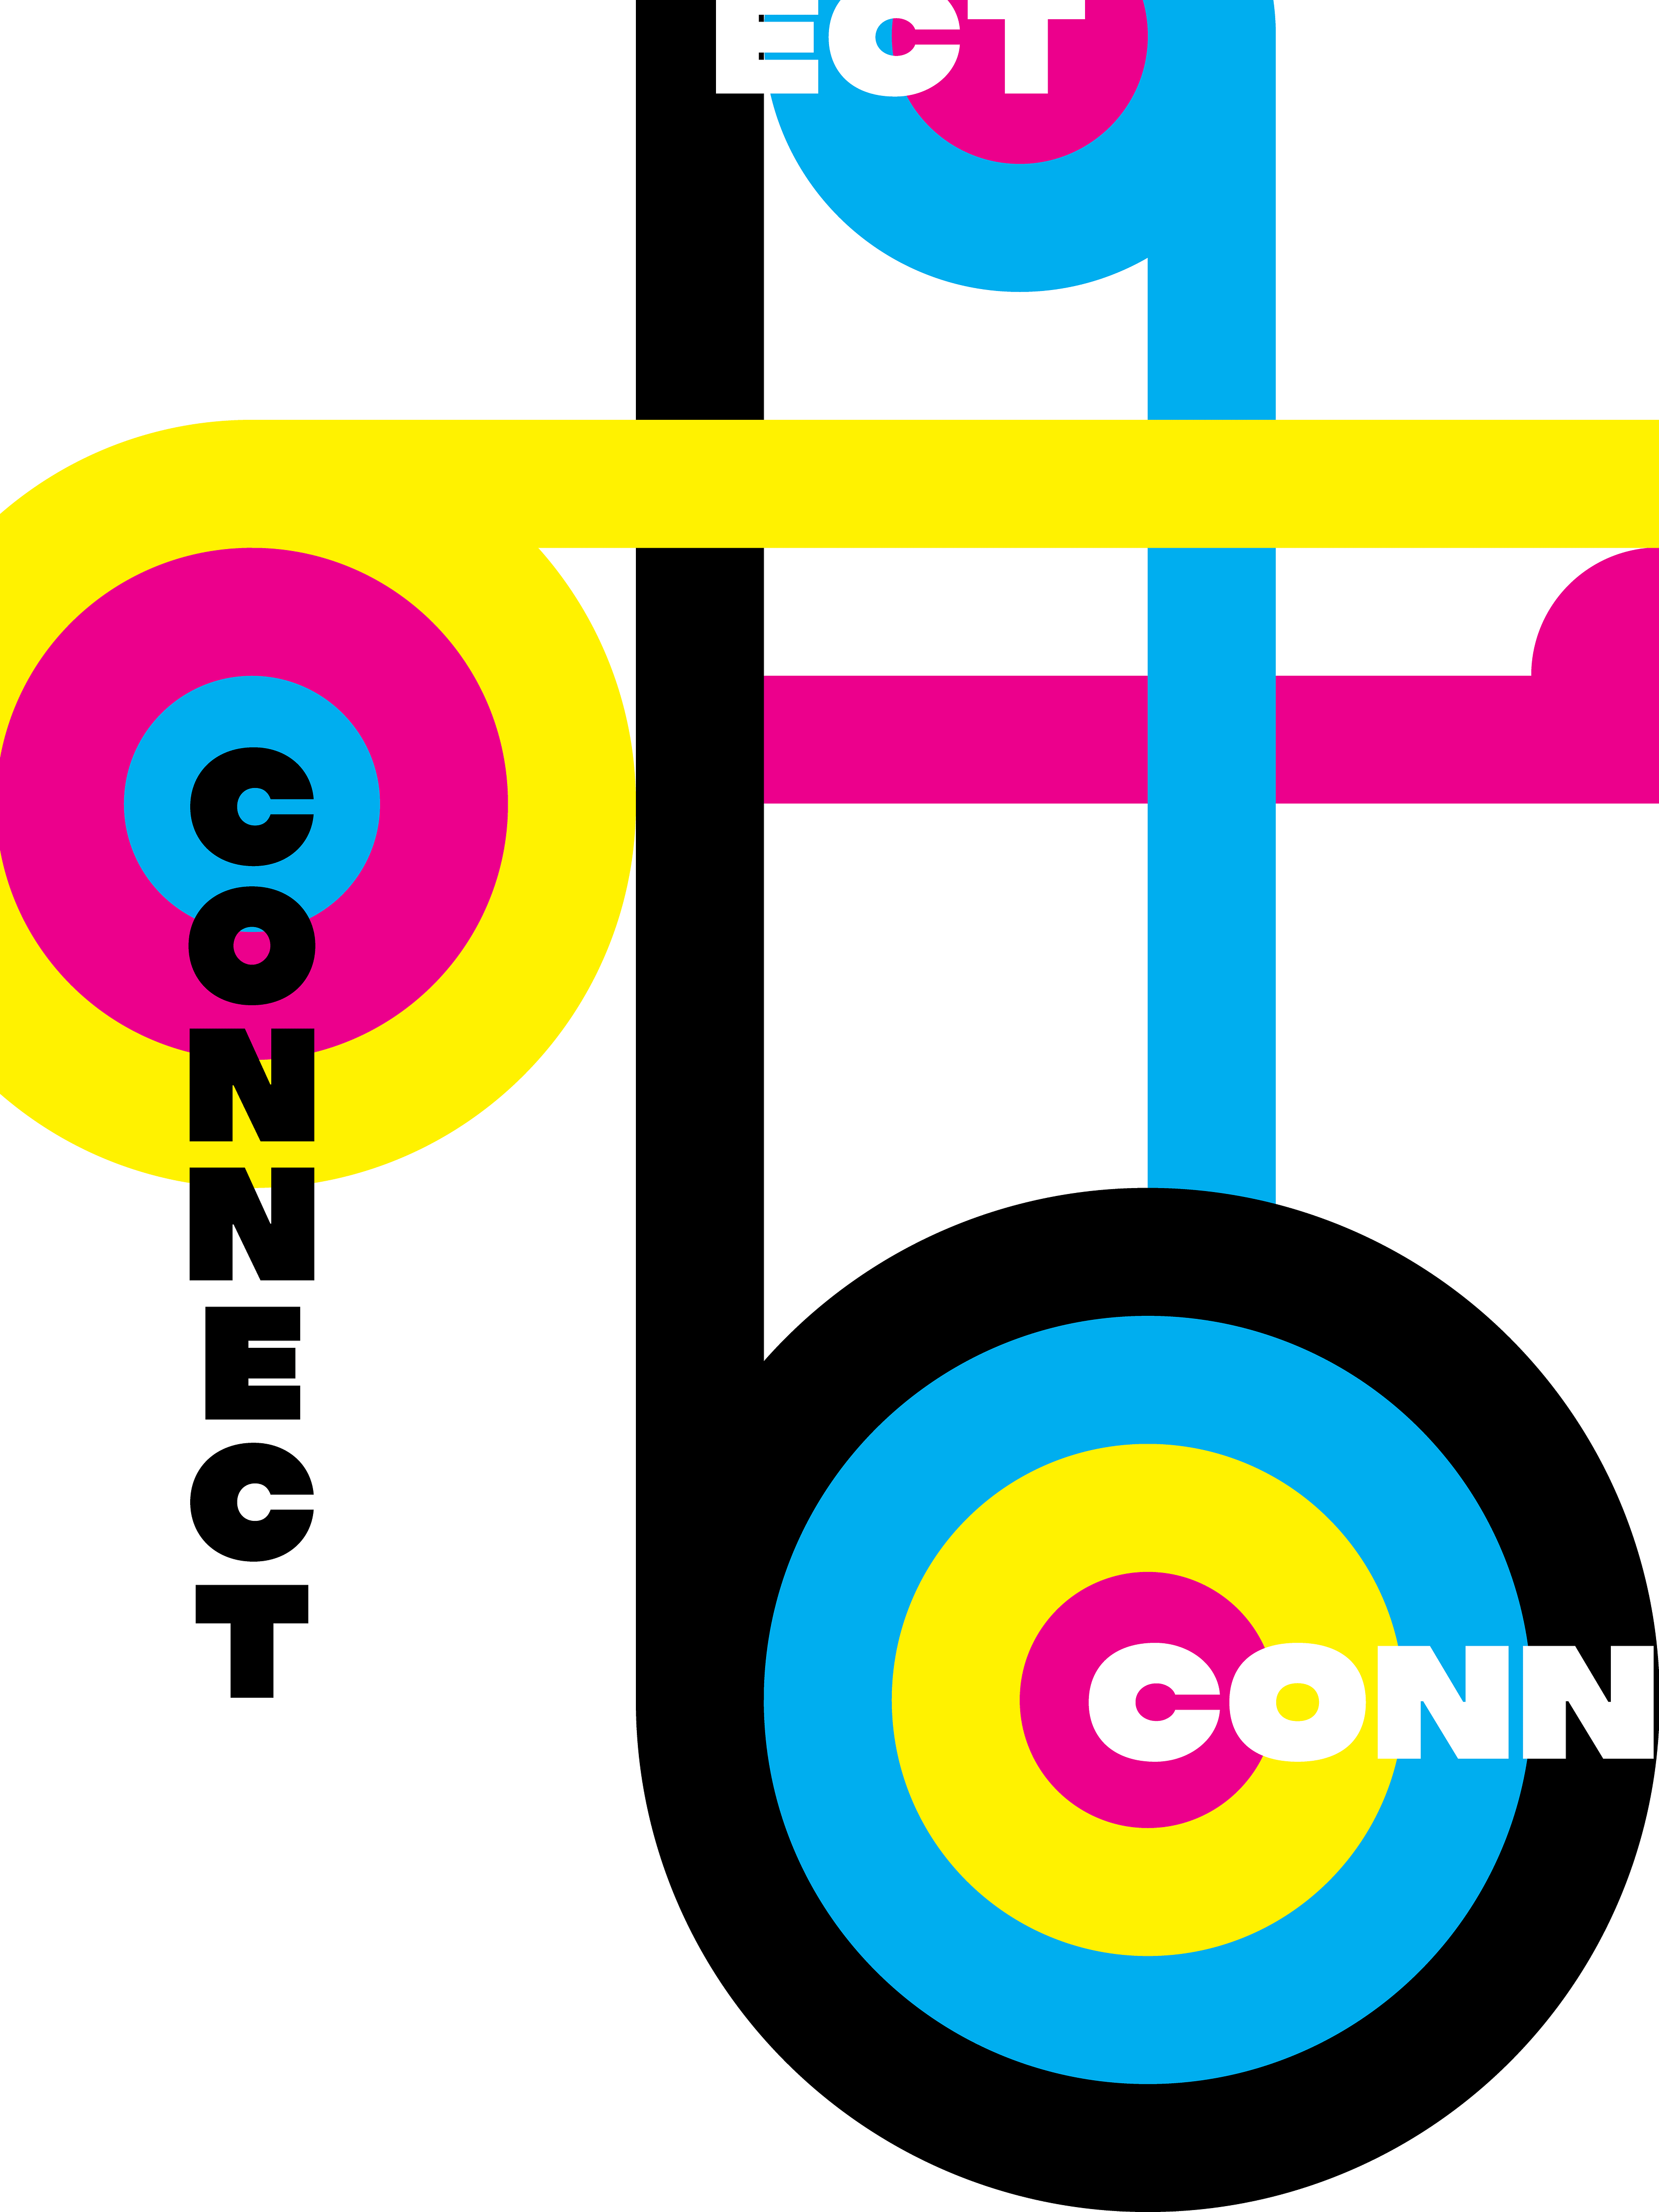 This is one of the first pieces made to explore the pure colors of CMYK. I decided to use the word connect to follow the imagery of the various lines intersecting each other.